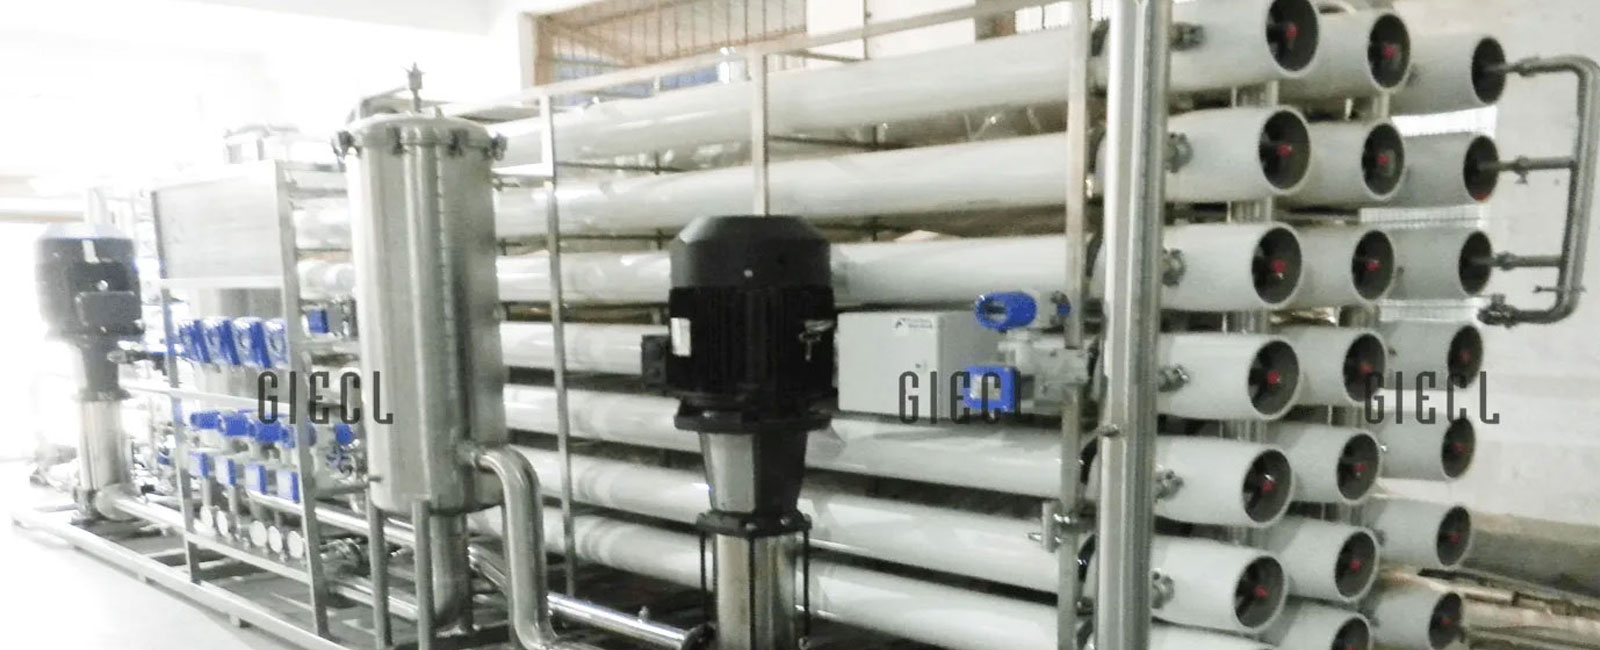 Pure Water Generation System